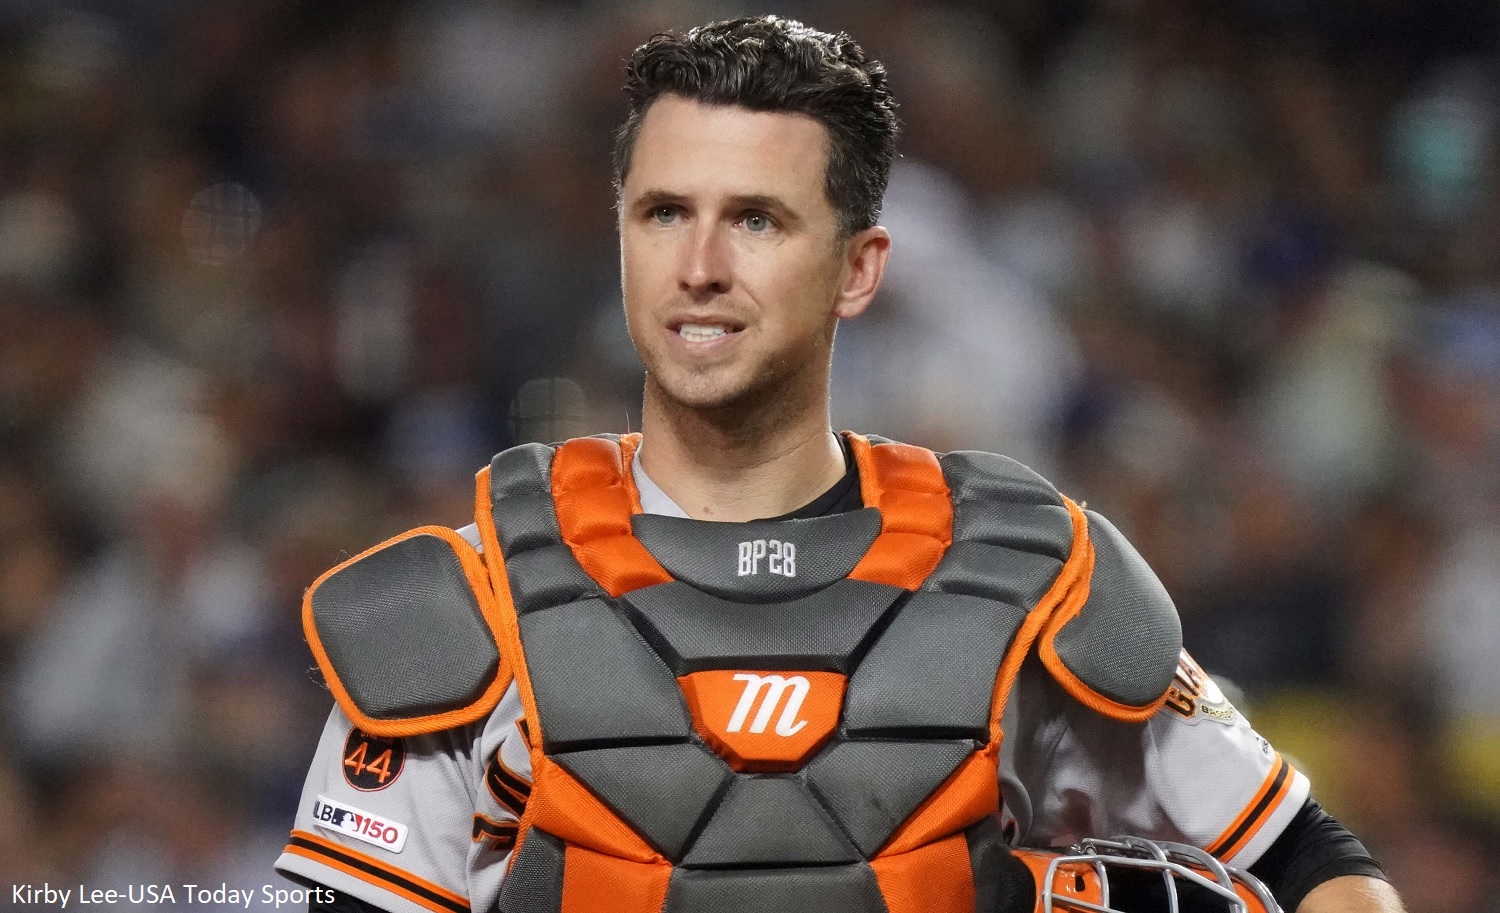 Buster Posey's RBI for Research 